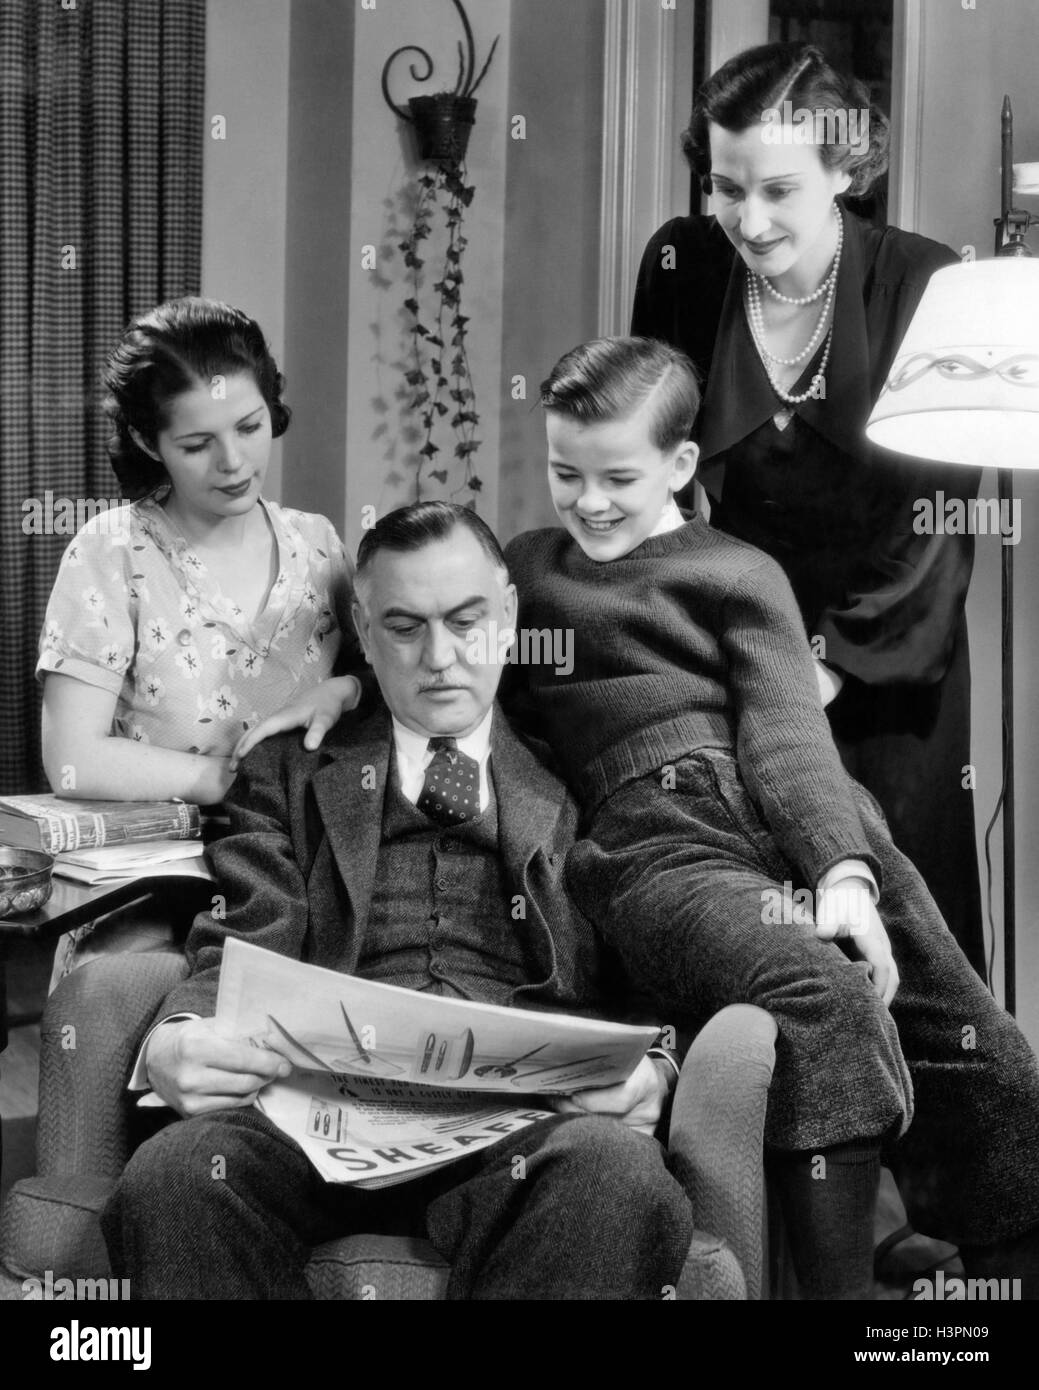 1940s FAMILY OF FOUR WOMAN MOTHER TEENAGE DAUGHTER GIRL AND SON BOY SITTING AROUND FATHER MAN READING NEWSPAPER Stock Photo